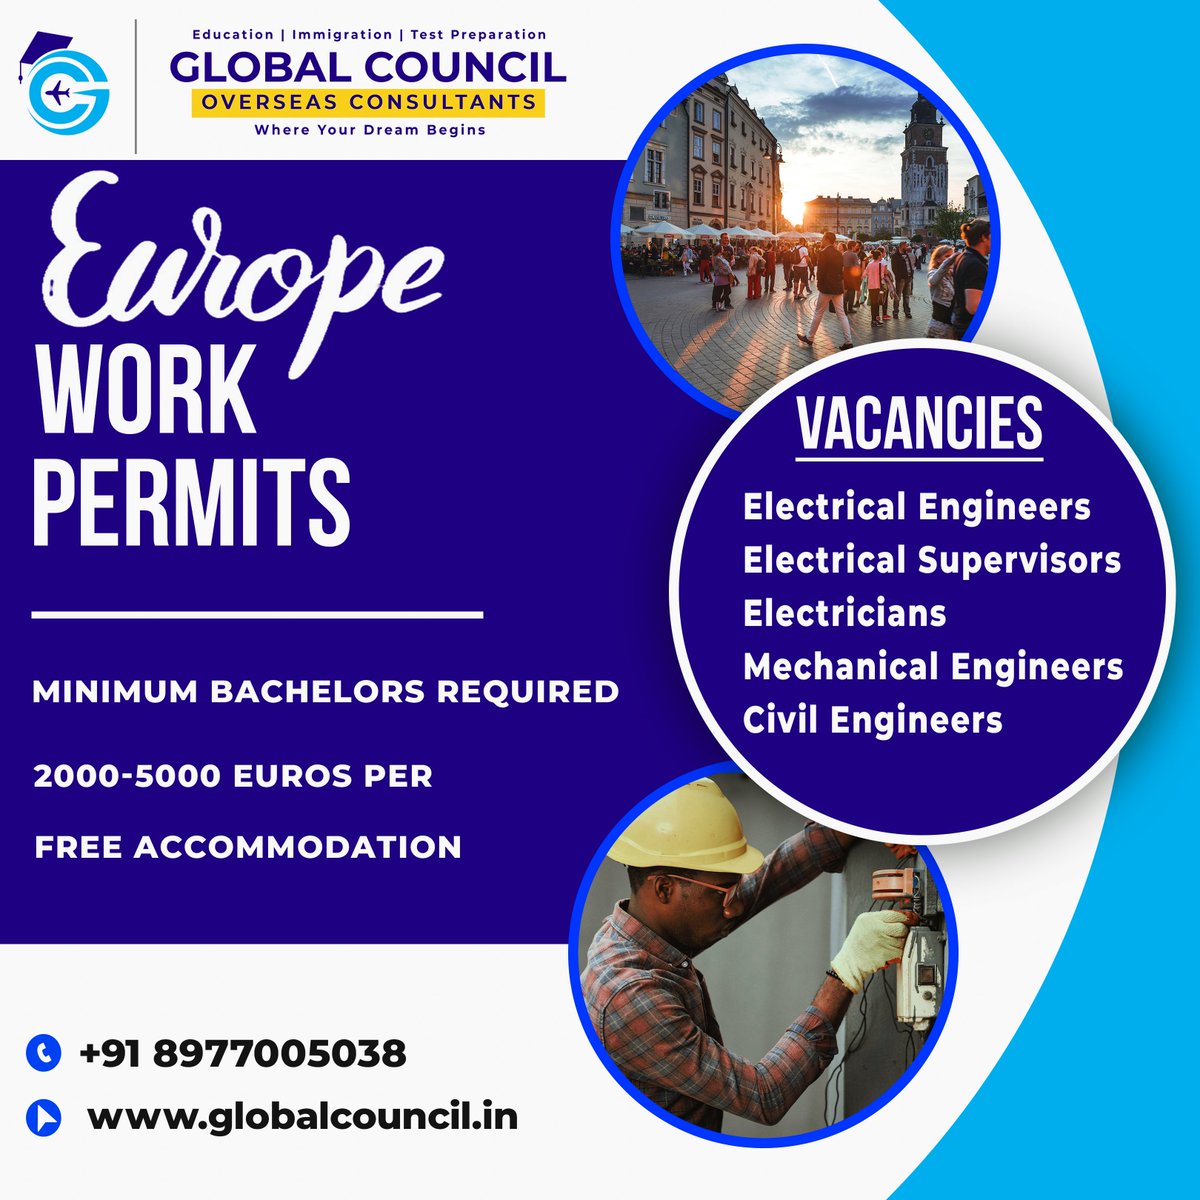 Join us for exciting career opportunities across various sectors in Europe.
.
.
#studyingermany #sudy #student #studyineurope #europeworkpermit #europe #european #workvisa #workpermit #ukworkvisa #usaworkpermit #australiavisa